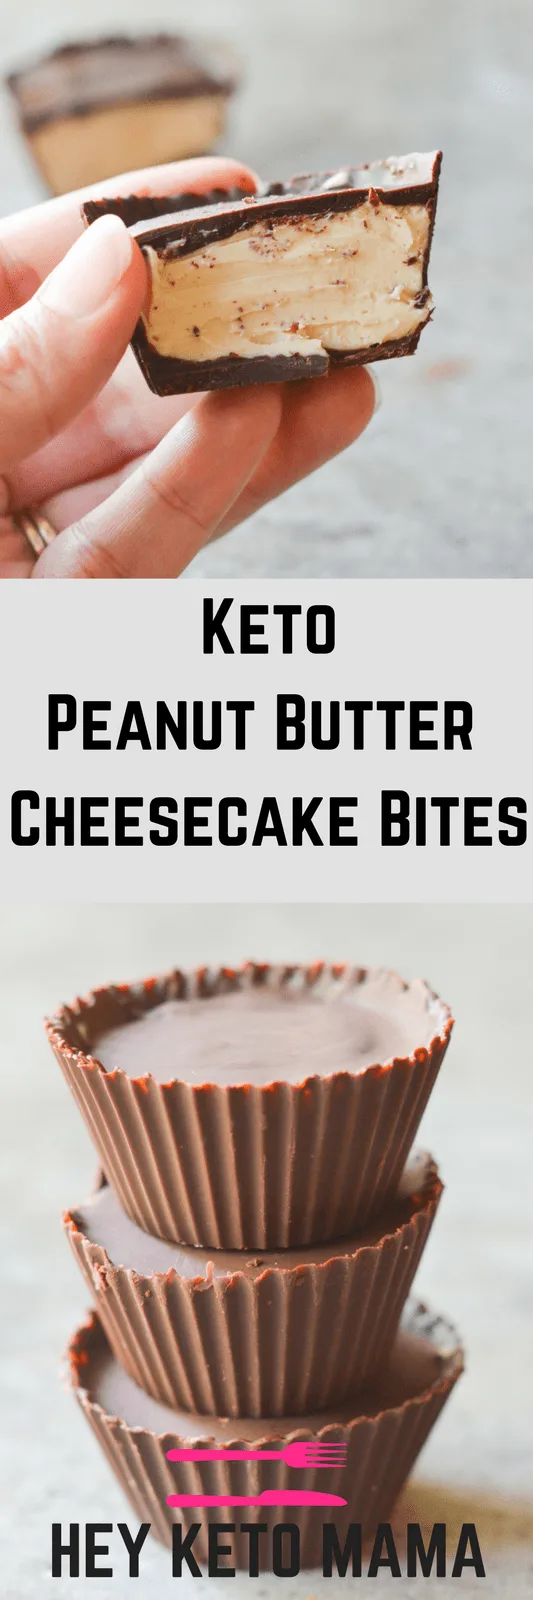 These Keto Peanut Butter Cheesecake Bites are a yummy, low carb, high fat, no-bake dessert that will have you running back for more! | heyketomama.com